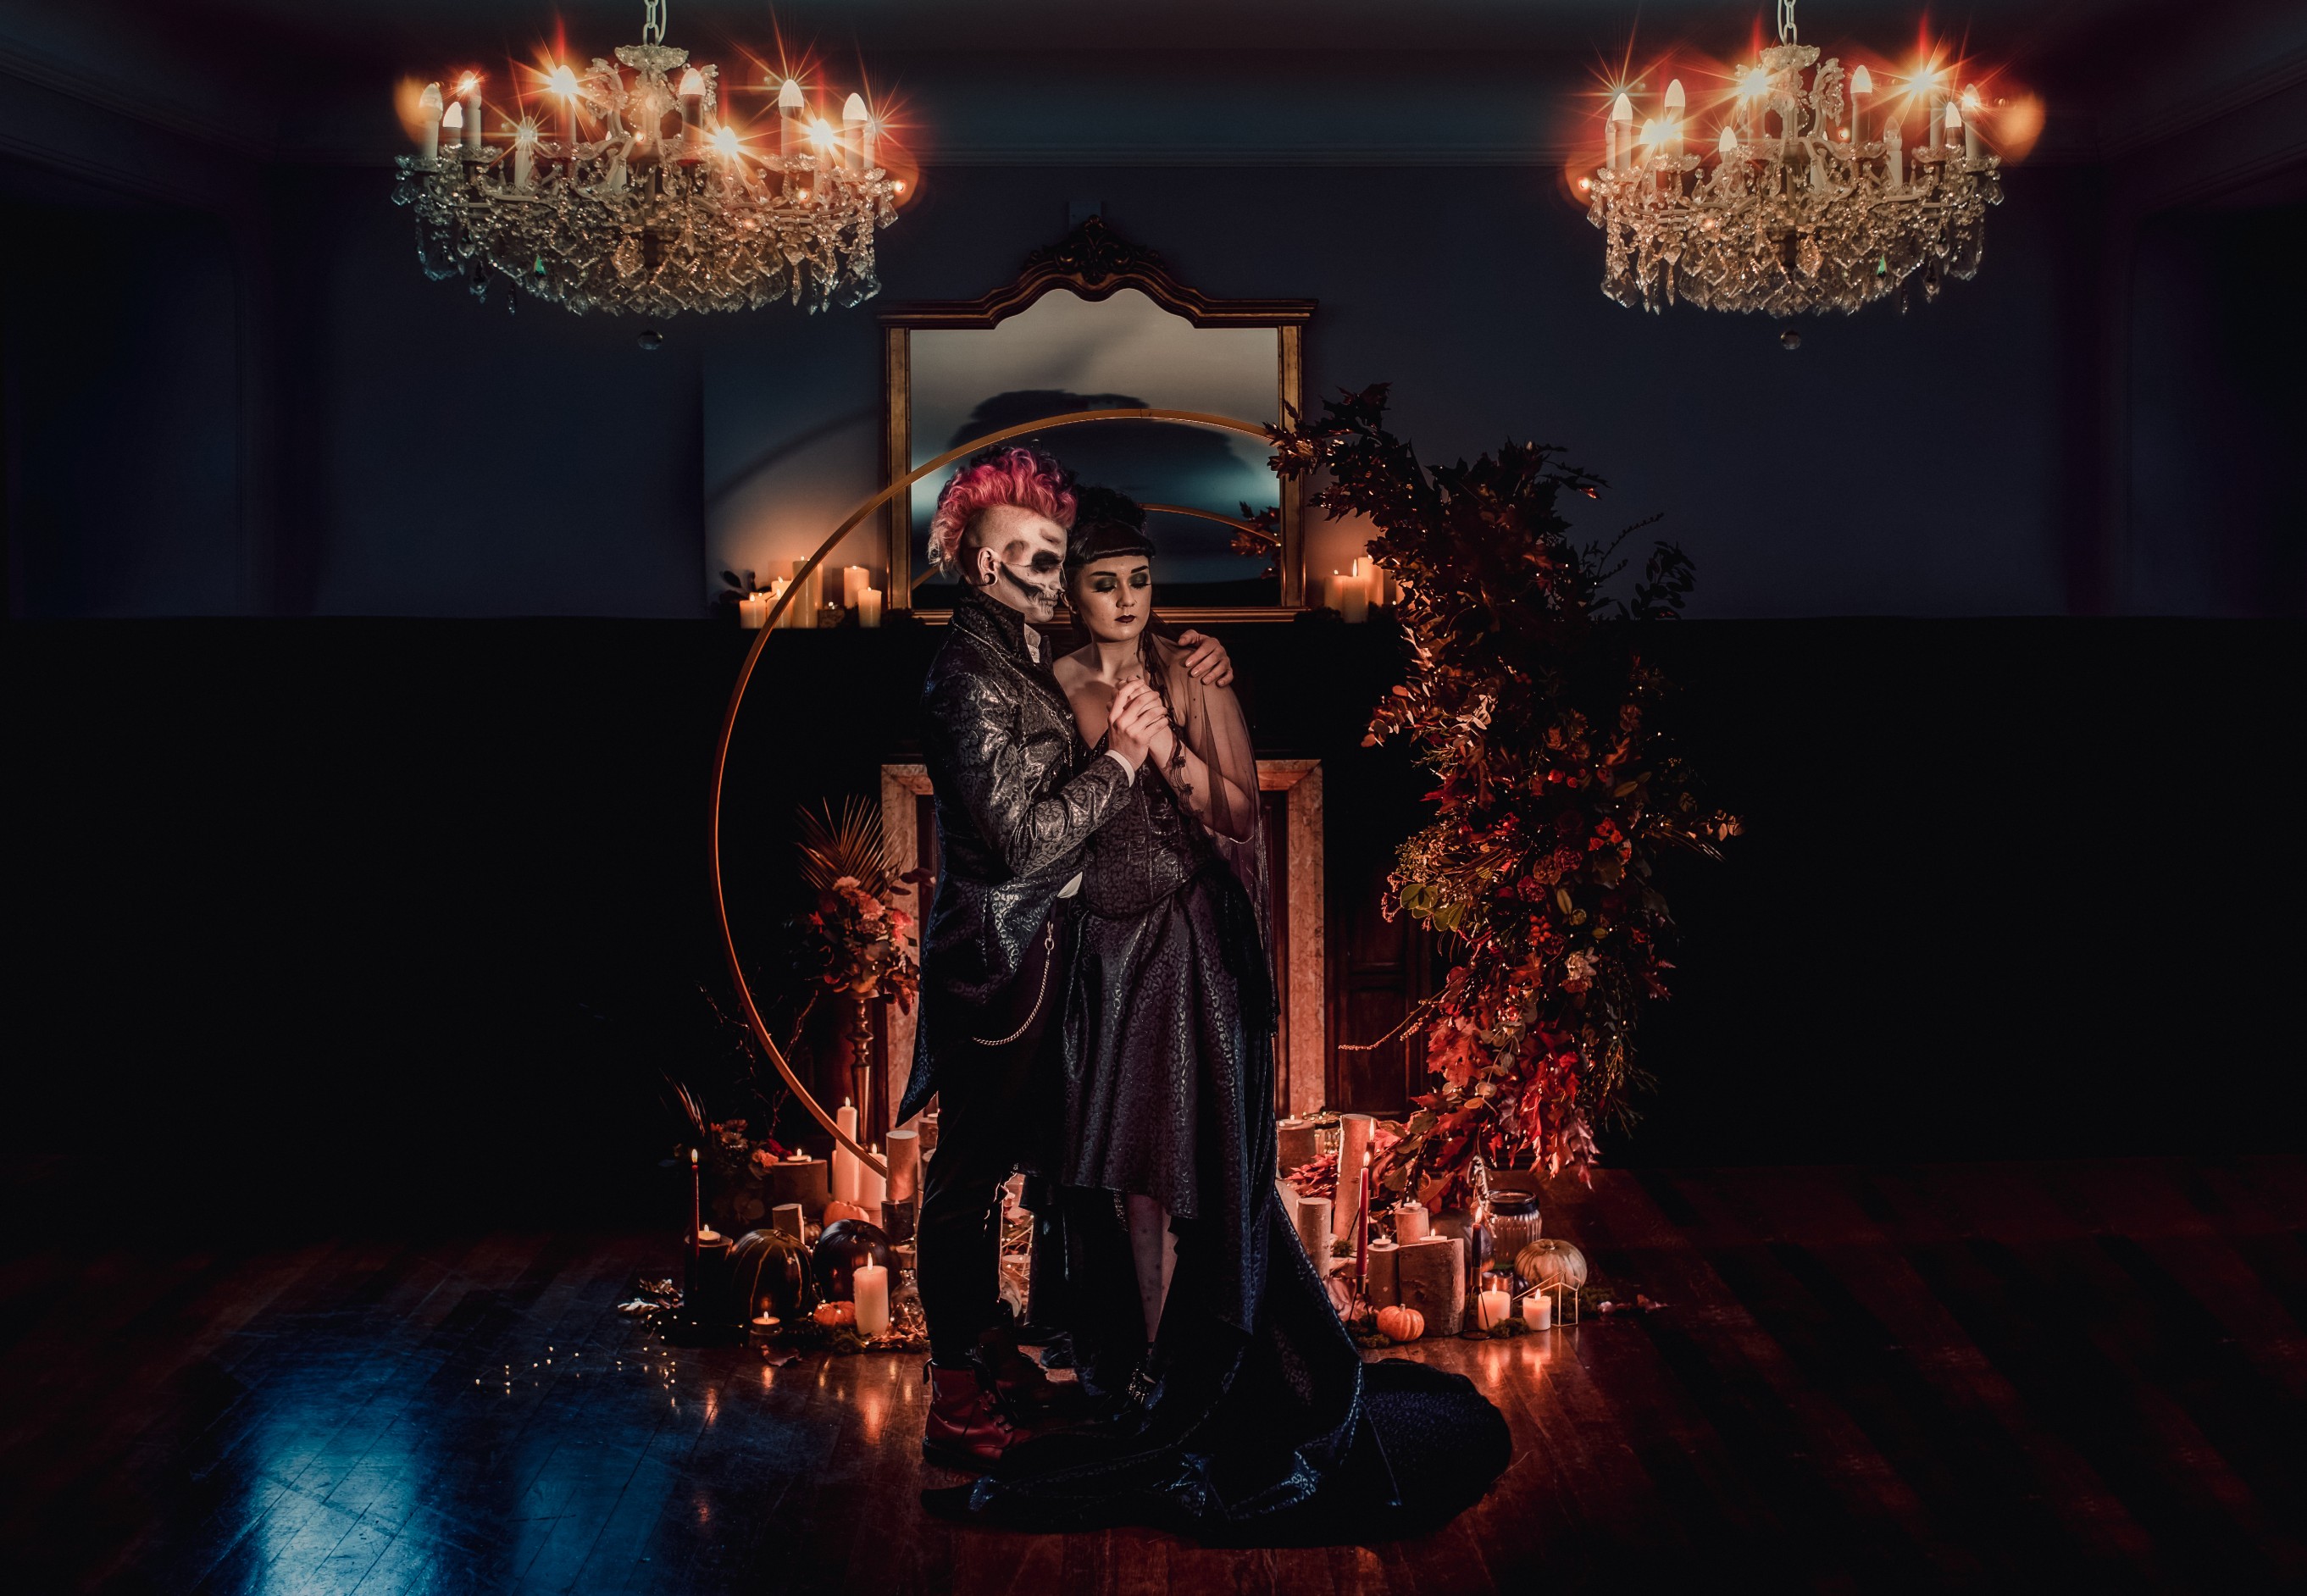 Gothic halloween wedding couple in the candlelight lit by two dramatic chandeliers against a dramatic floral arch backdrop at abbot oak wedding venue